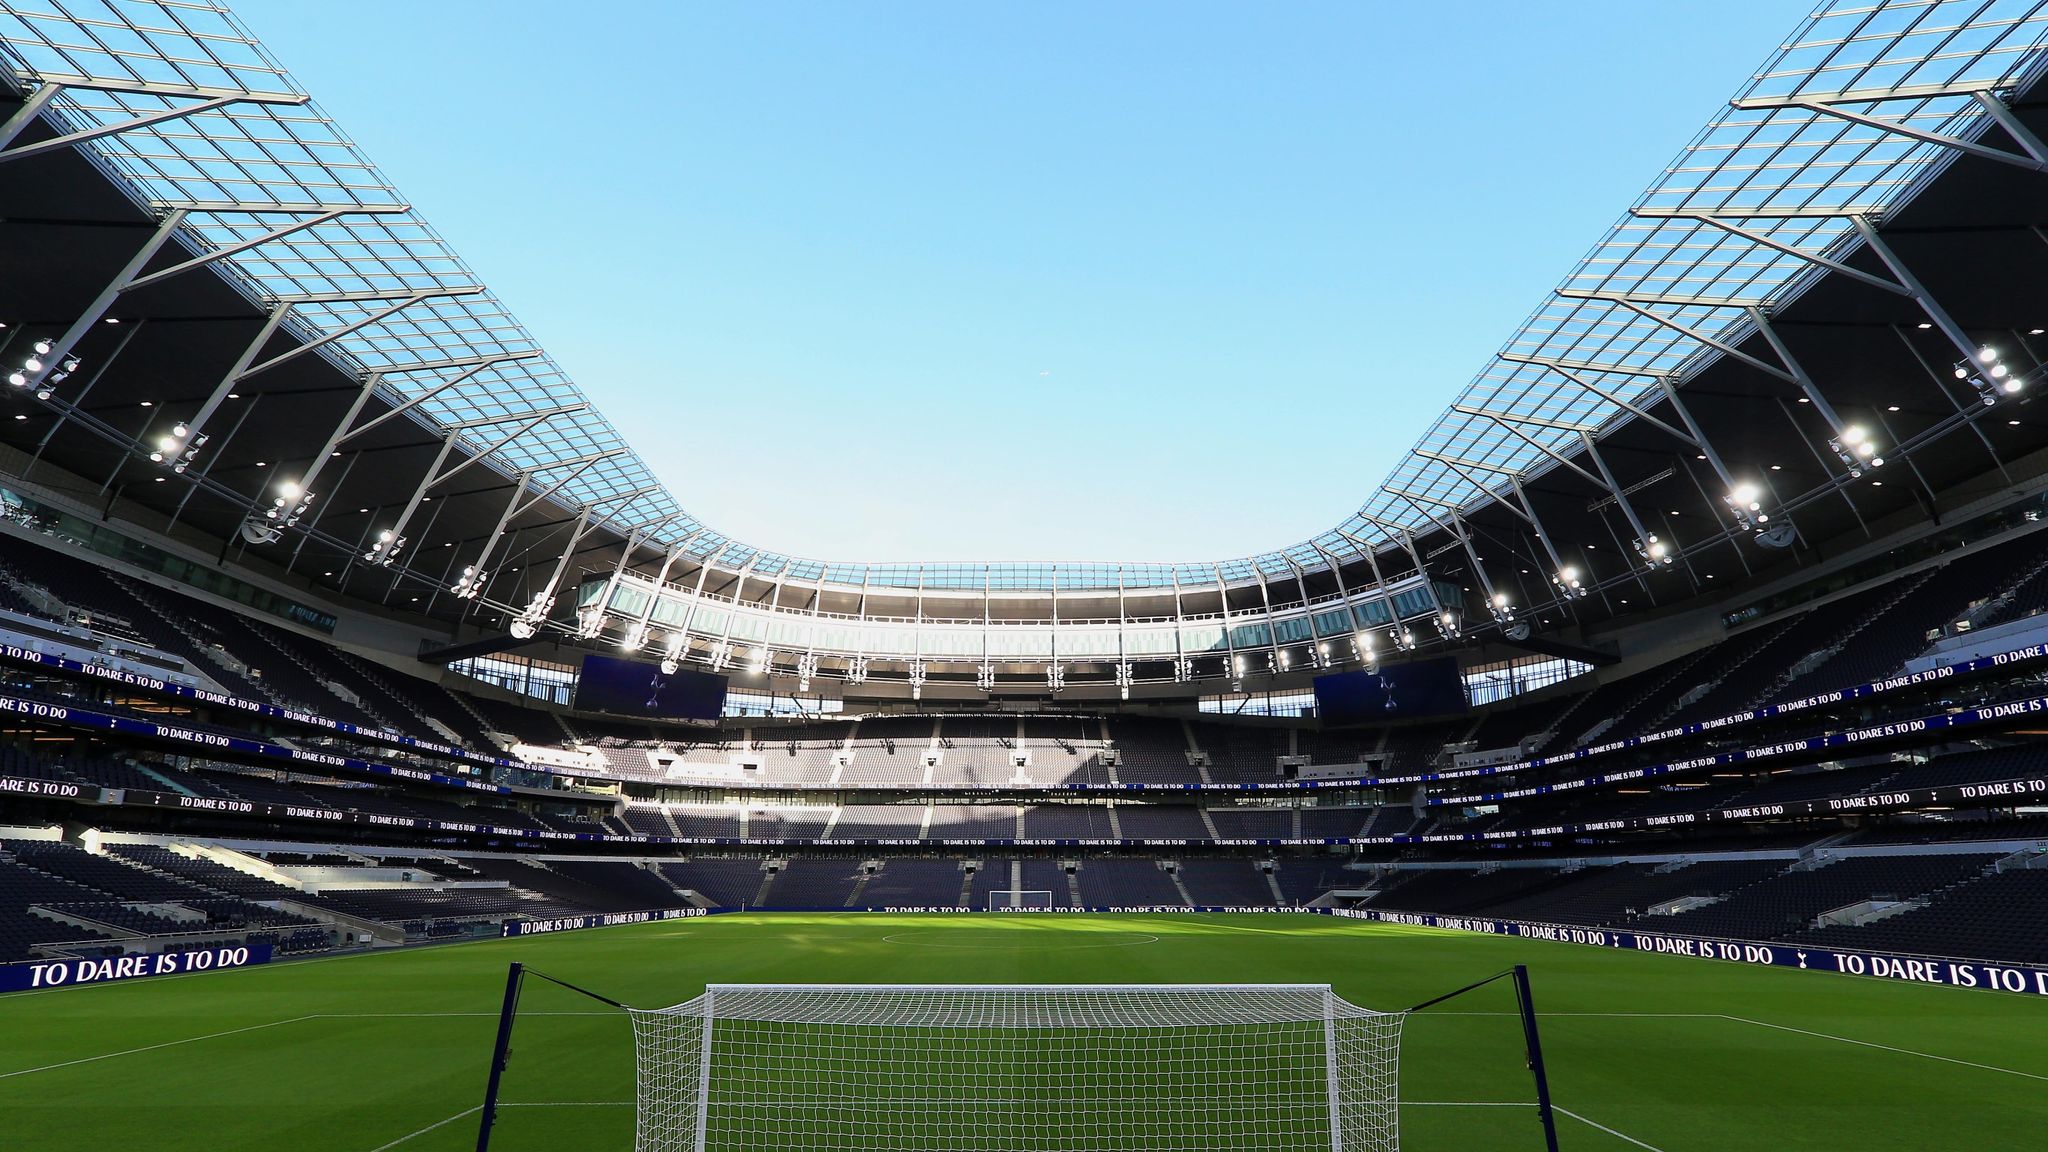 Tottenham continuing to play at Wembley for next month with